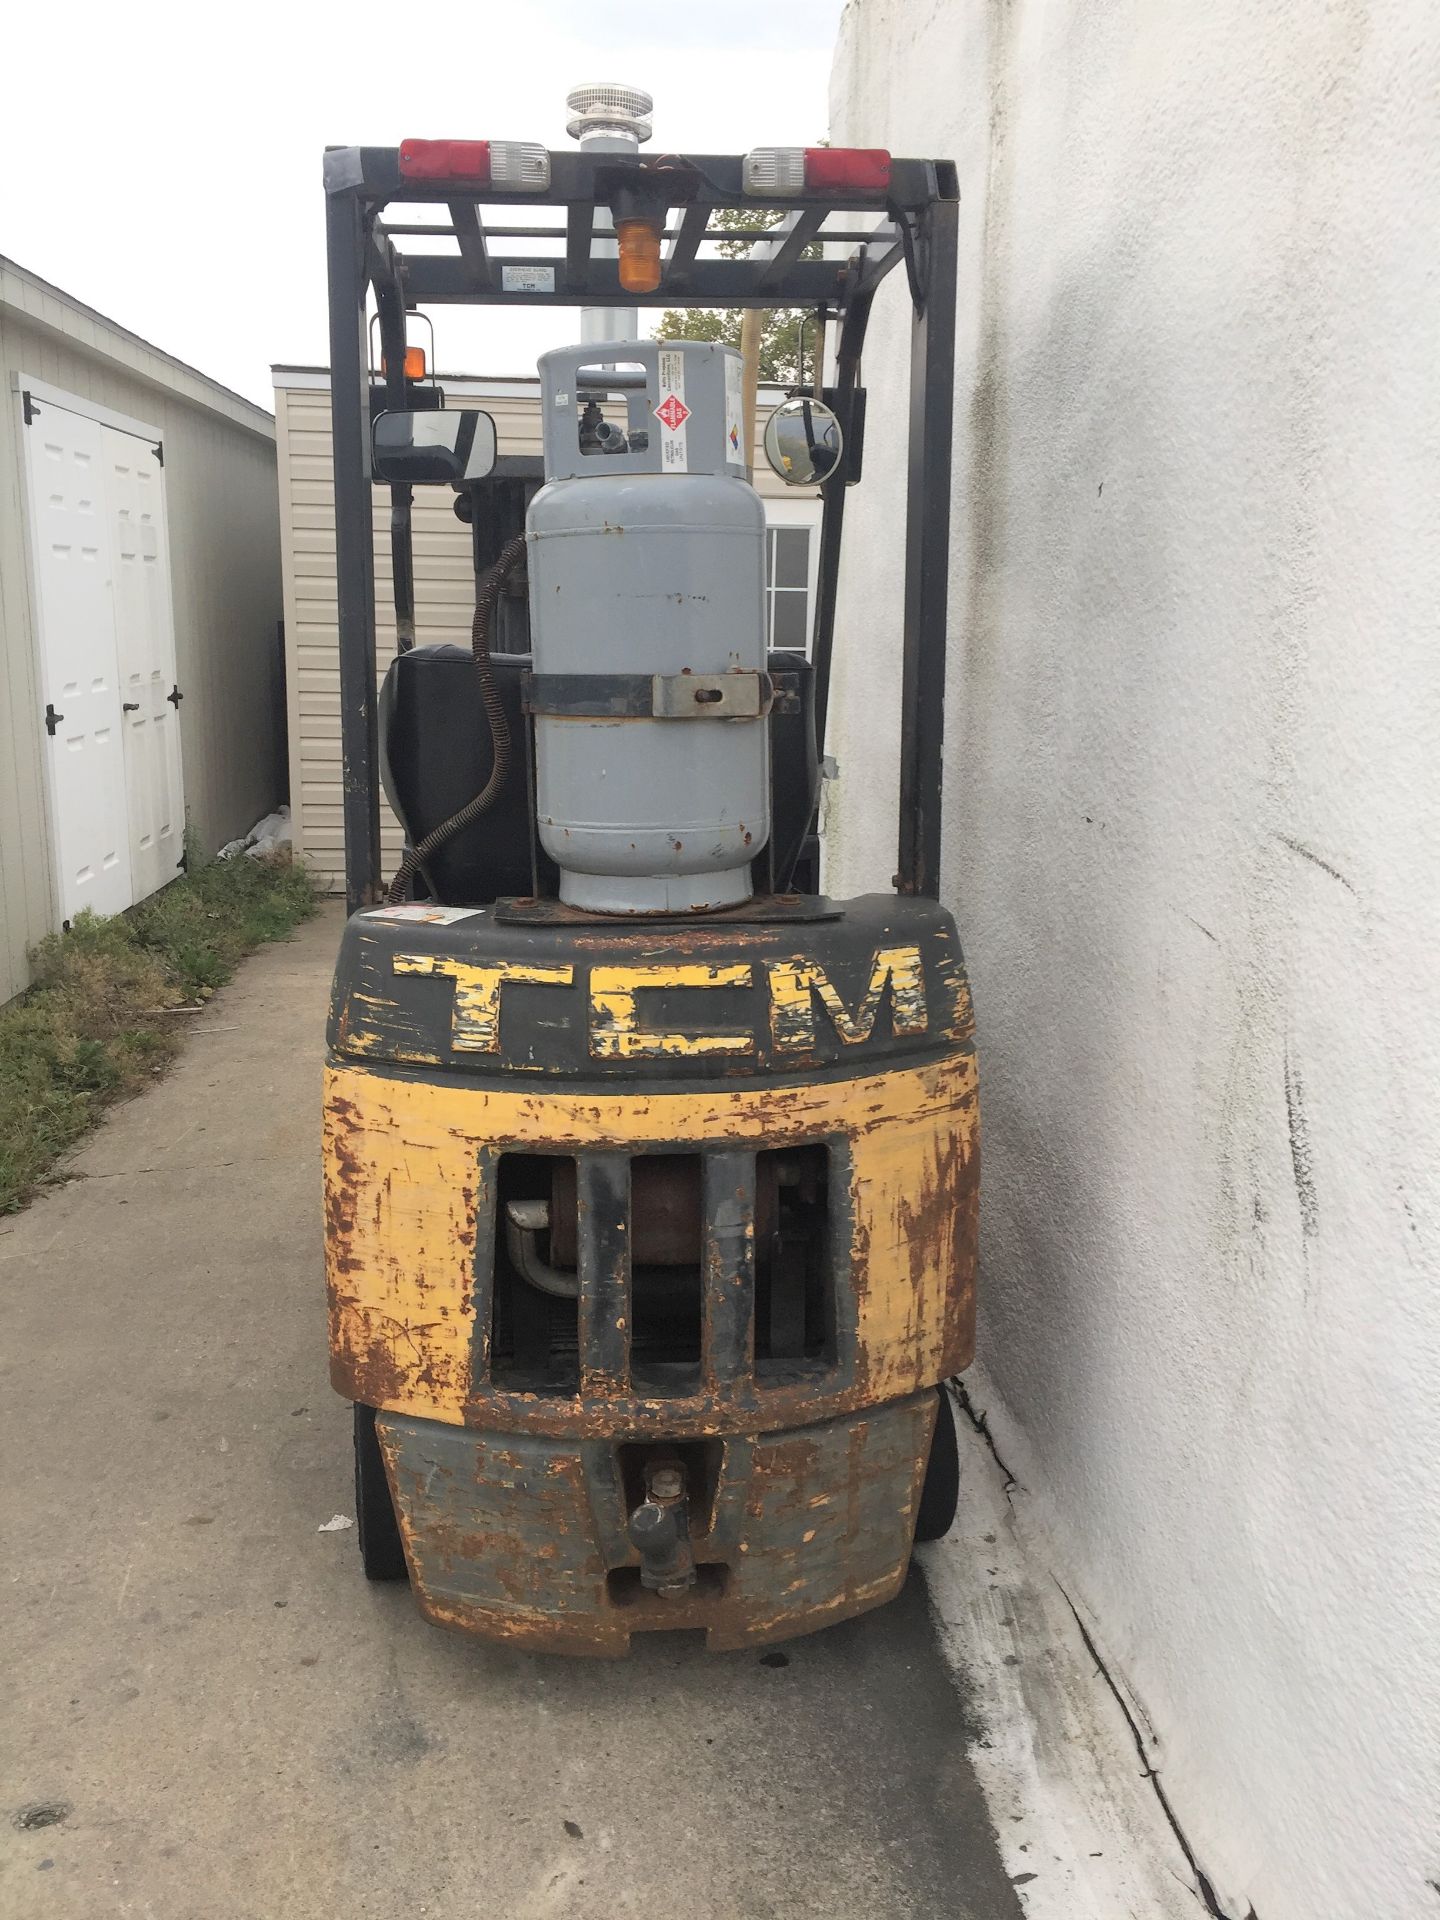 TCM 3000 LB forklift Model FCG15T8T. Buyer agrees to leave the forklift on location for 1 week so - Image 5 of 5